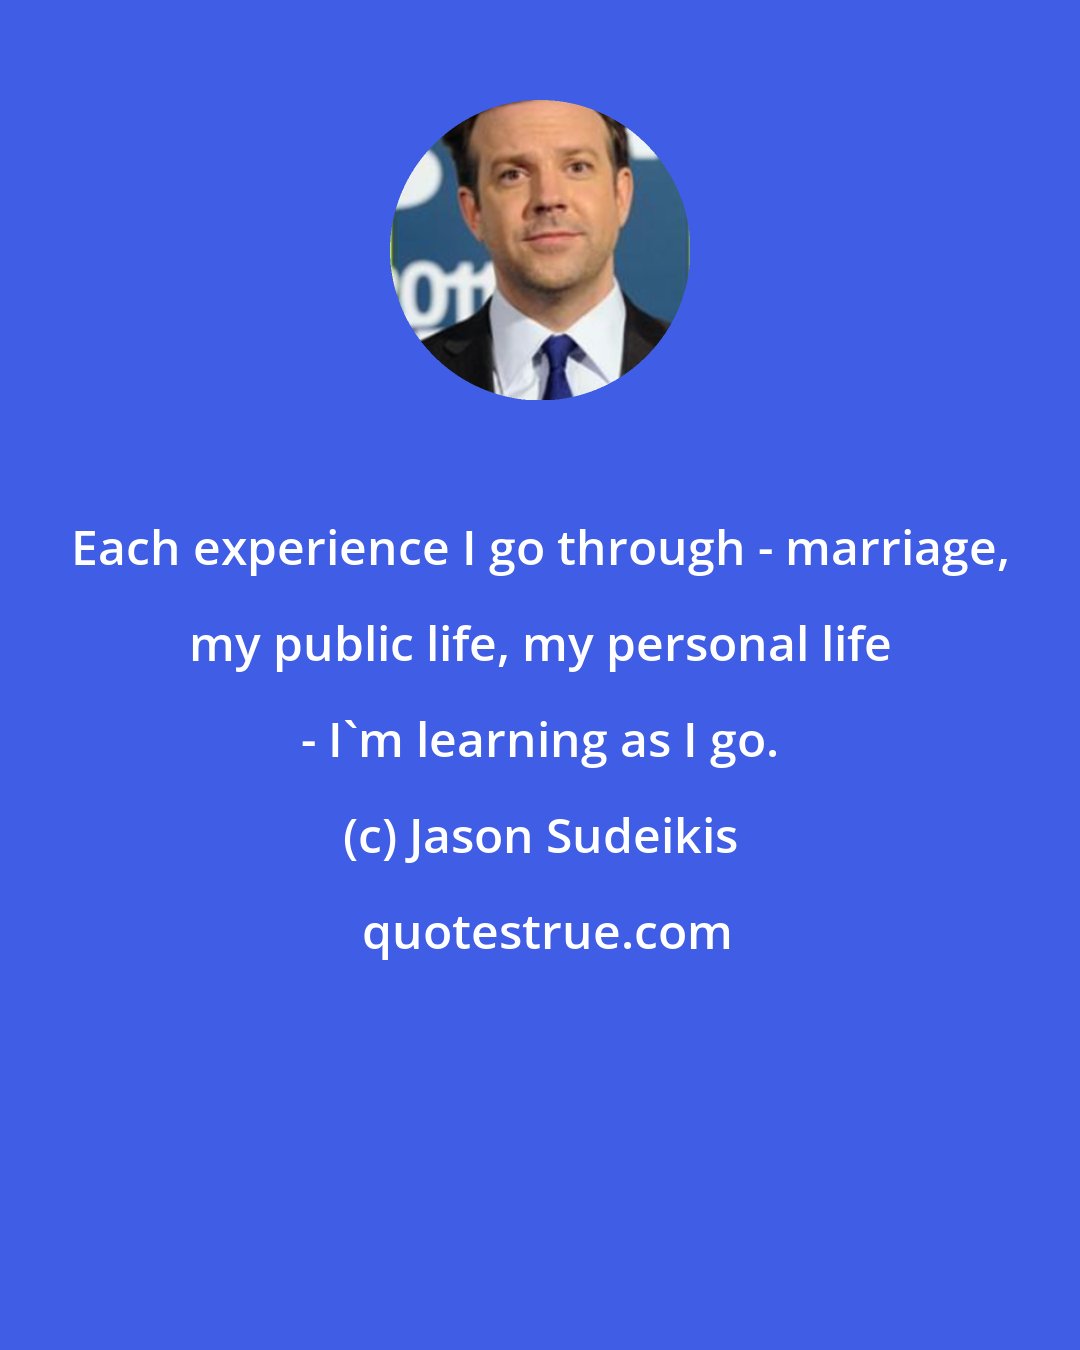 Jason Sudeikis: Each experience I go through - marriage, my public life, my personal life - I'm learning as I go.